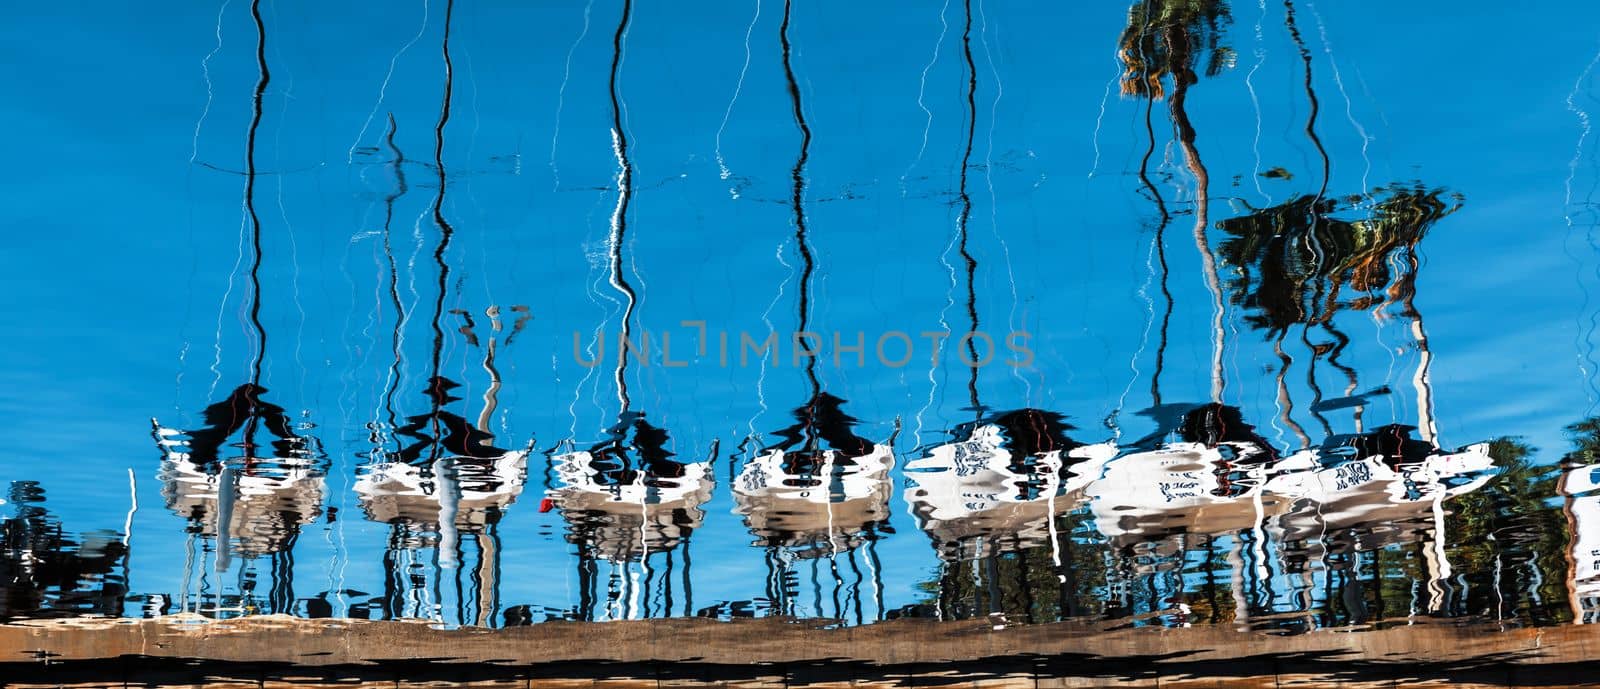 Water reflection of the line of sailboats docked in St. Petersburg, Florida